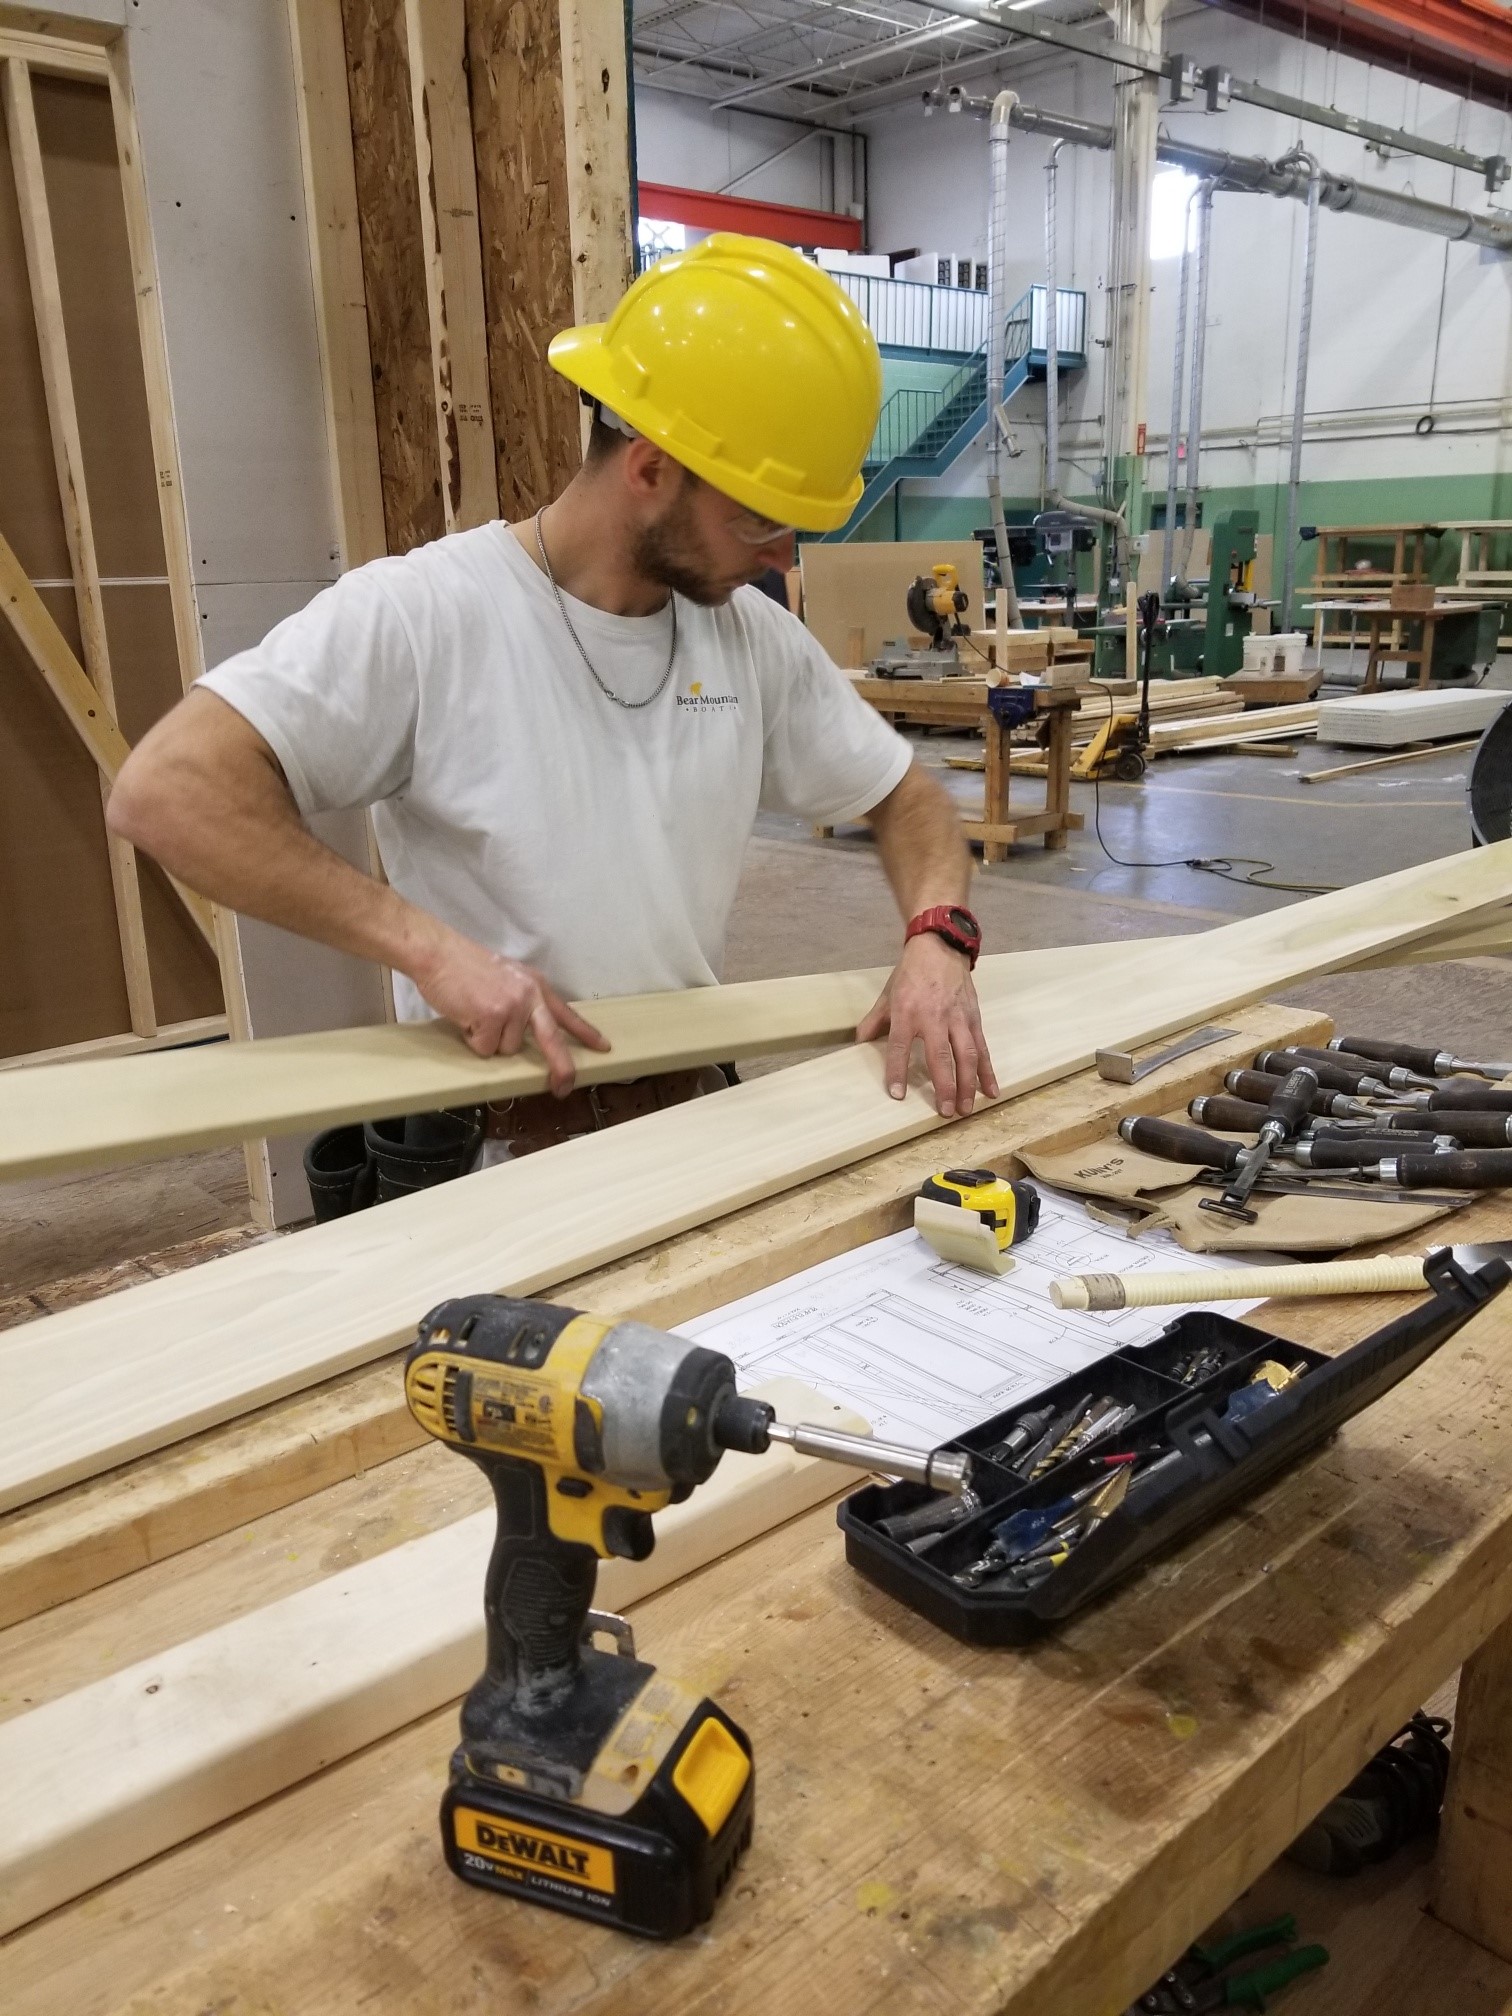 Covid 19 Pandemic Has Sped Up The Inevitable Shift To Online Learning For Apprentice Carpenters Ontario Construction Report